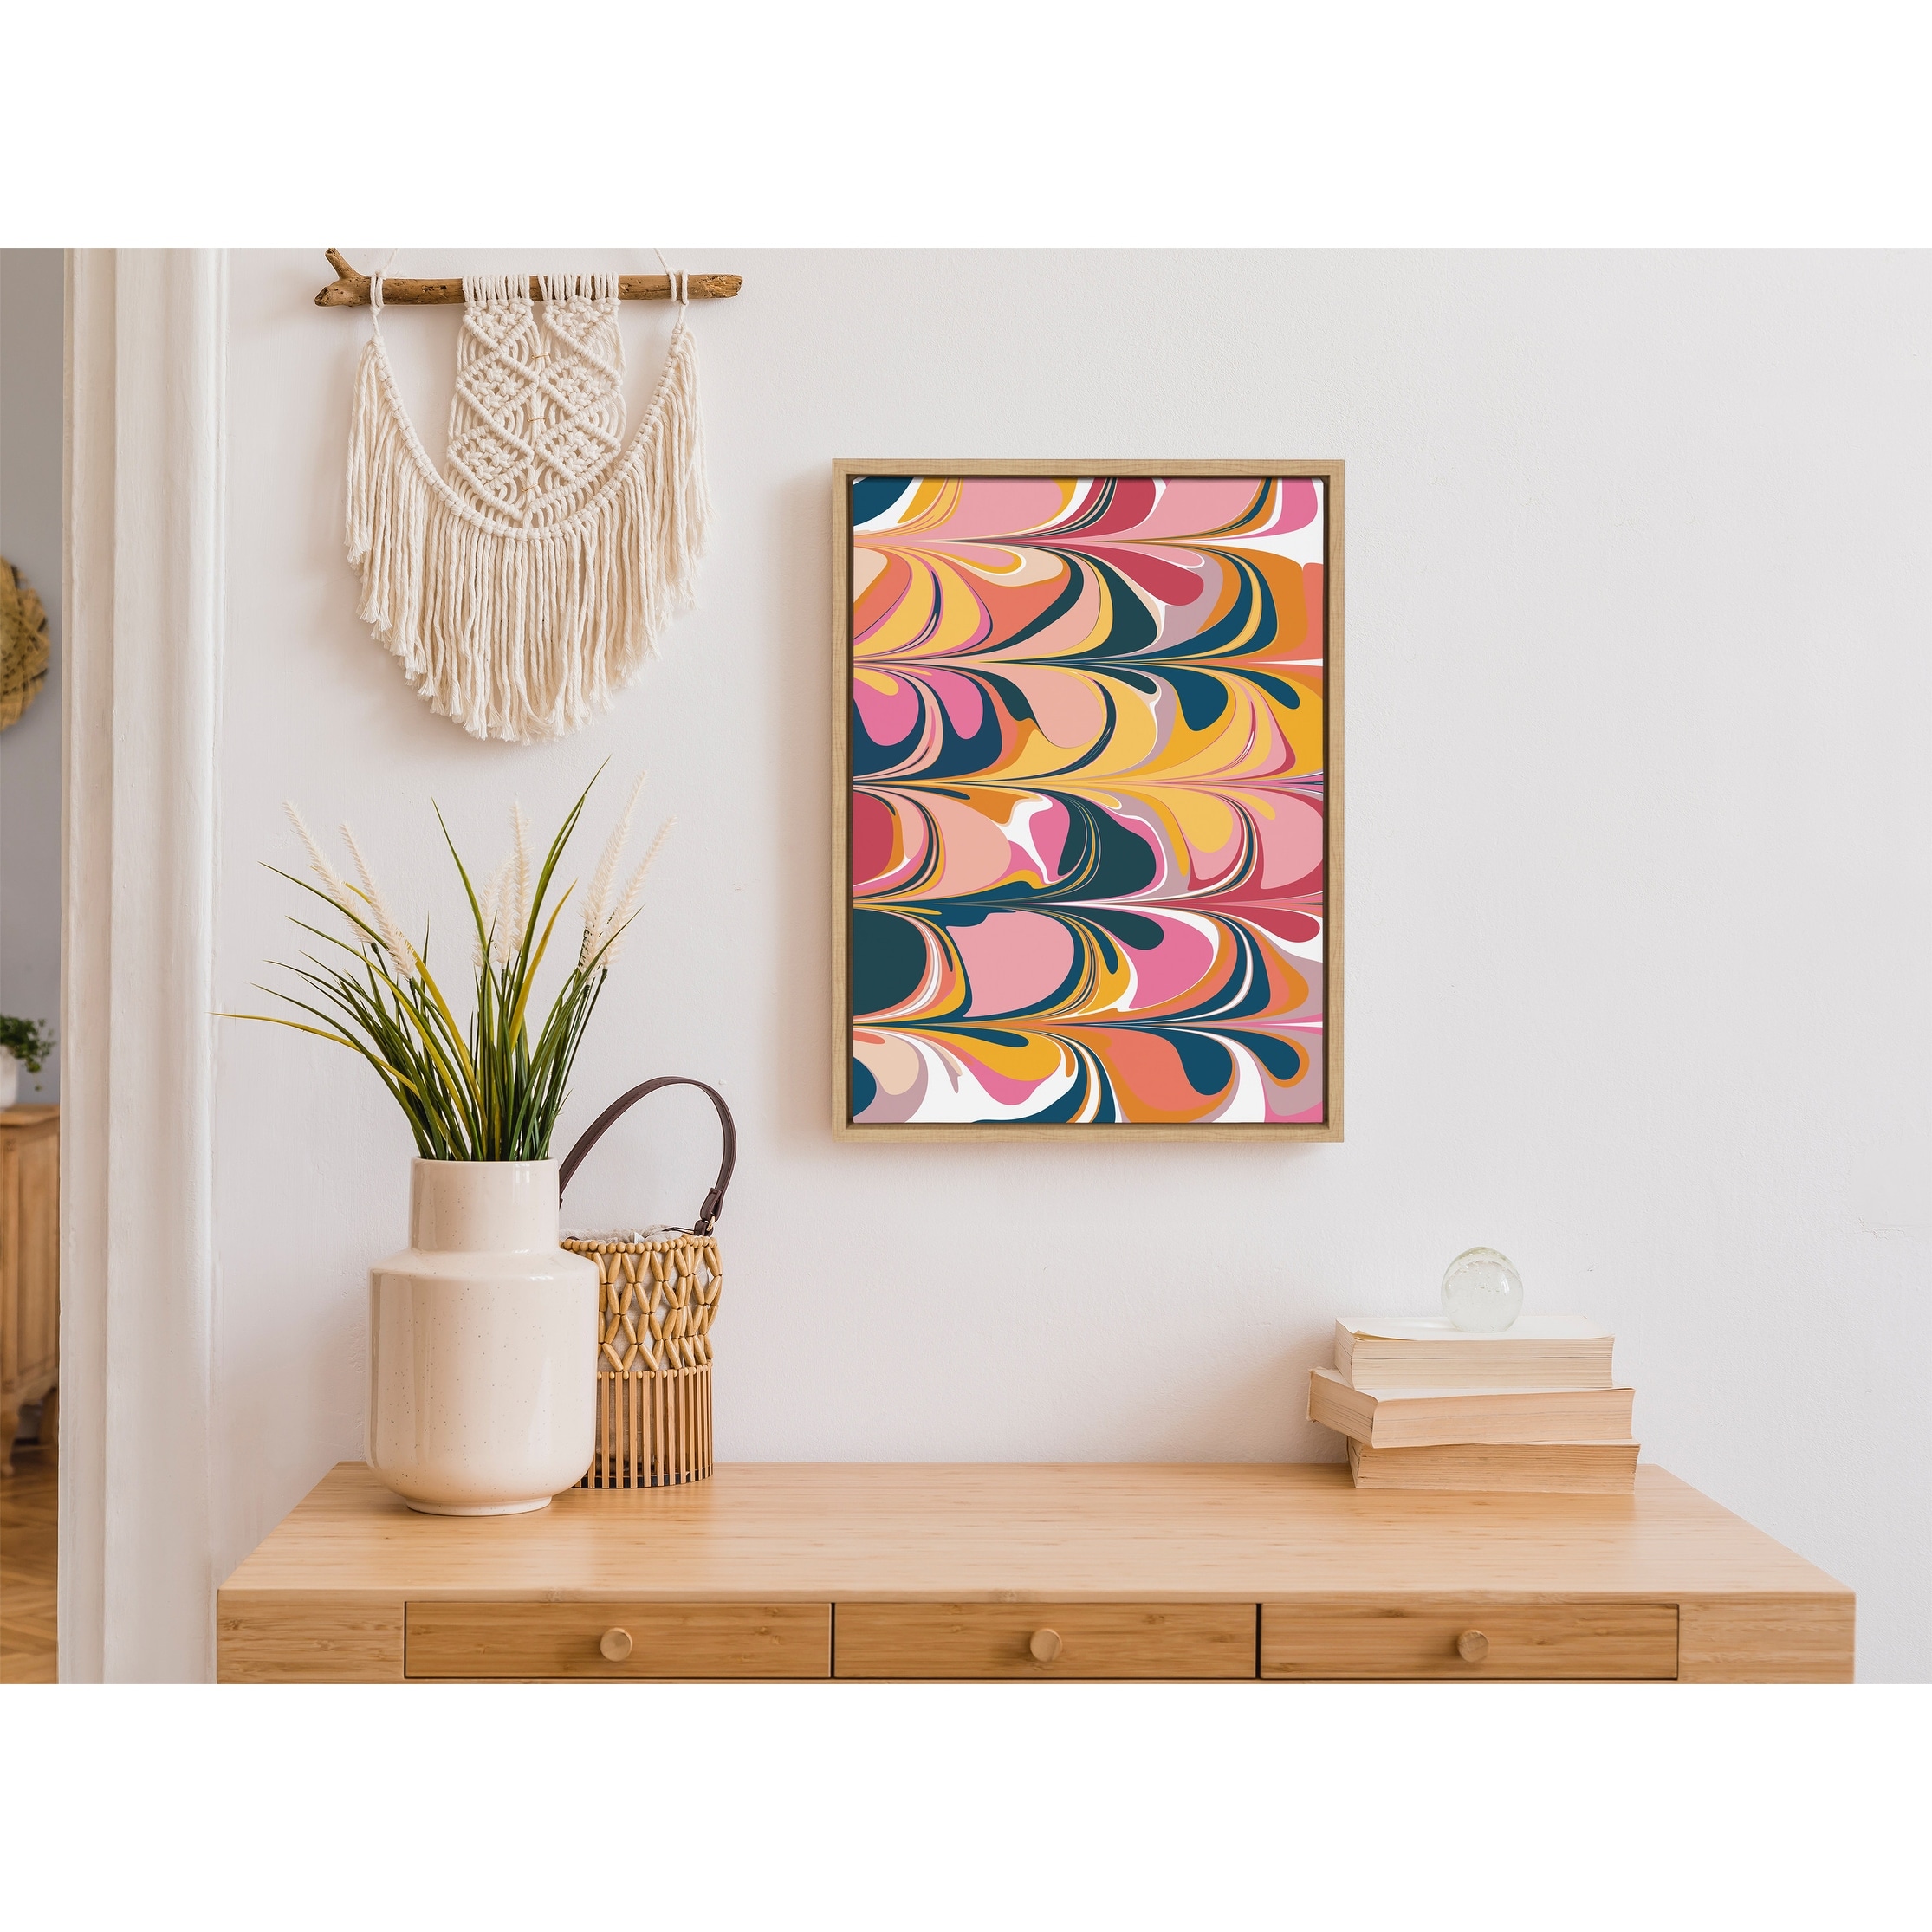 Kate and Laurel Sylvie Colorful Framed Canvas by Apricot and Birch On  Sale Bed Bath  Beyond 32662983